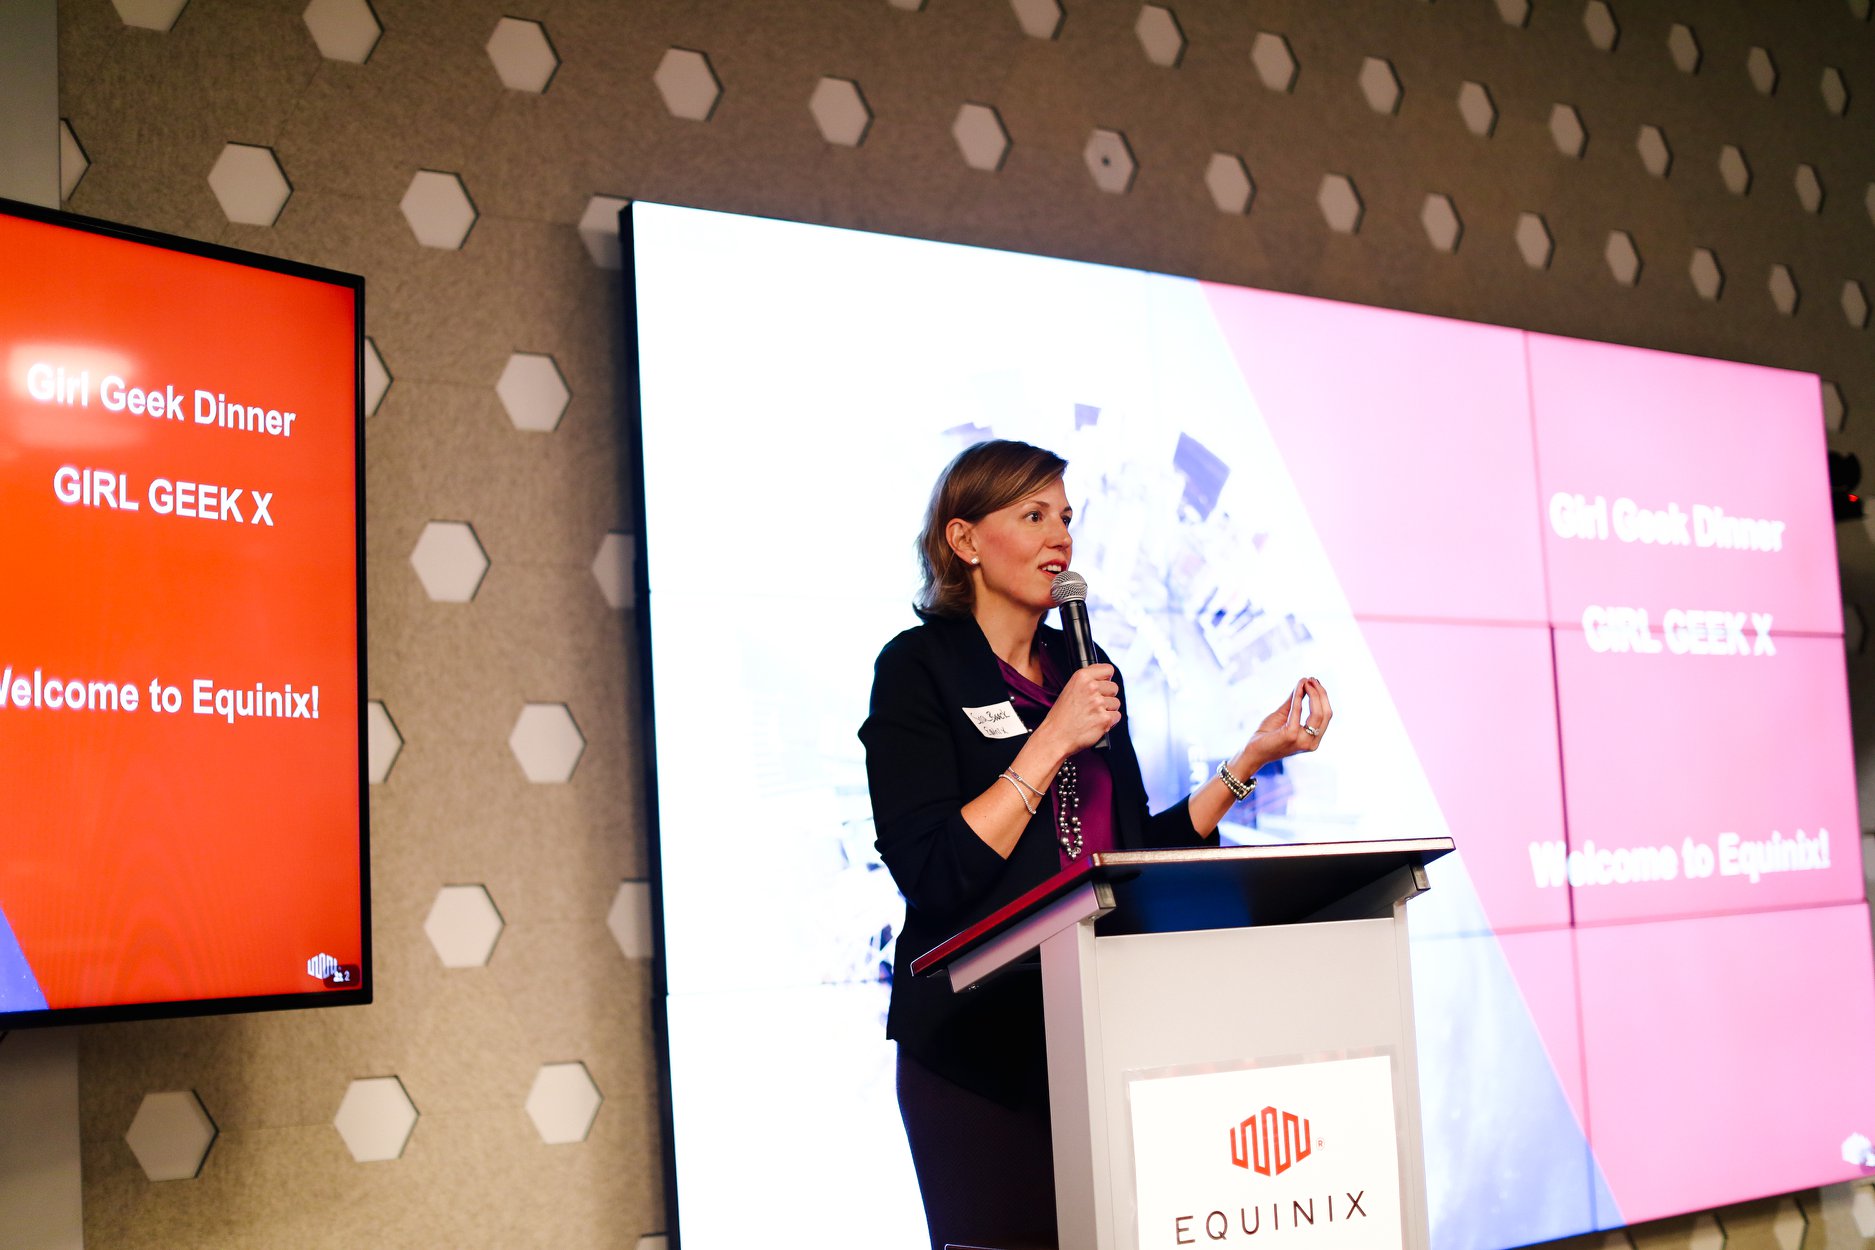 Chief Product Officer Sara Baack gives talk on “From Wall Street to C-Suite” at Equinix Girl Geek Dinner 2019.